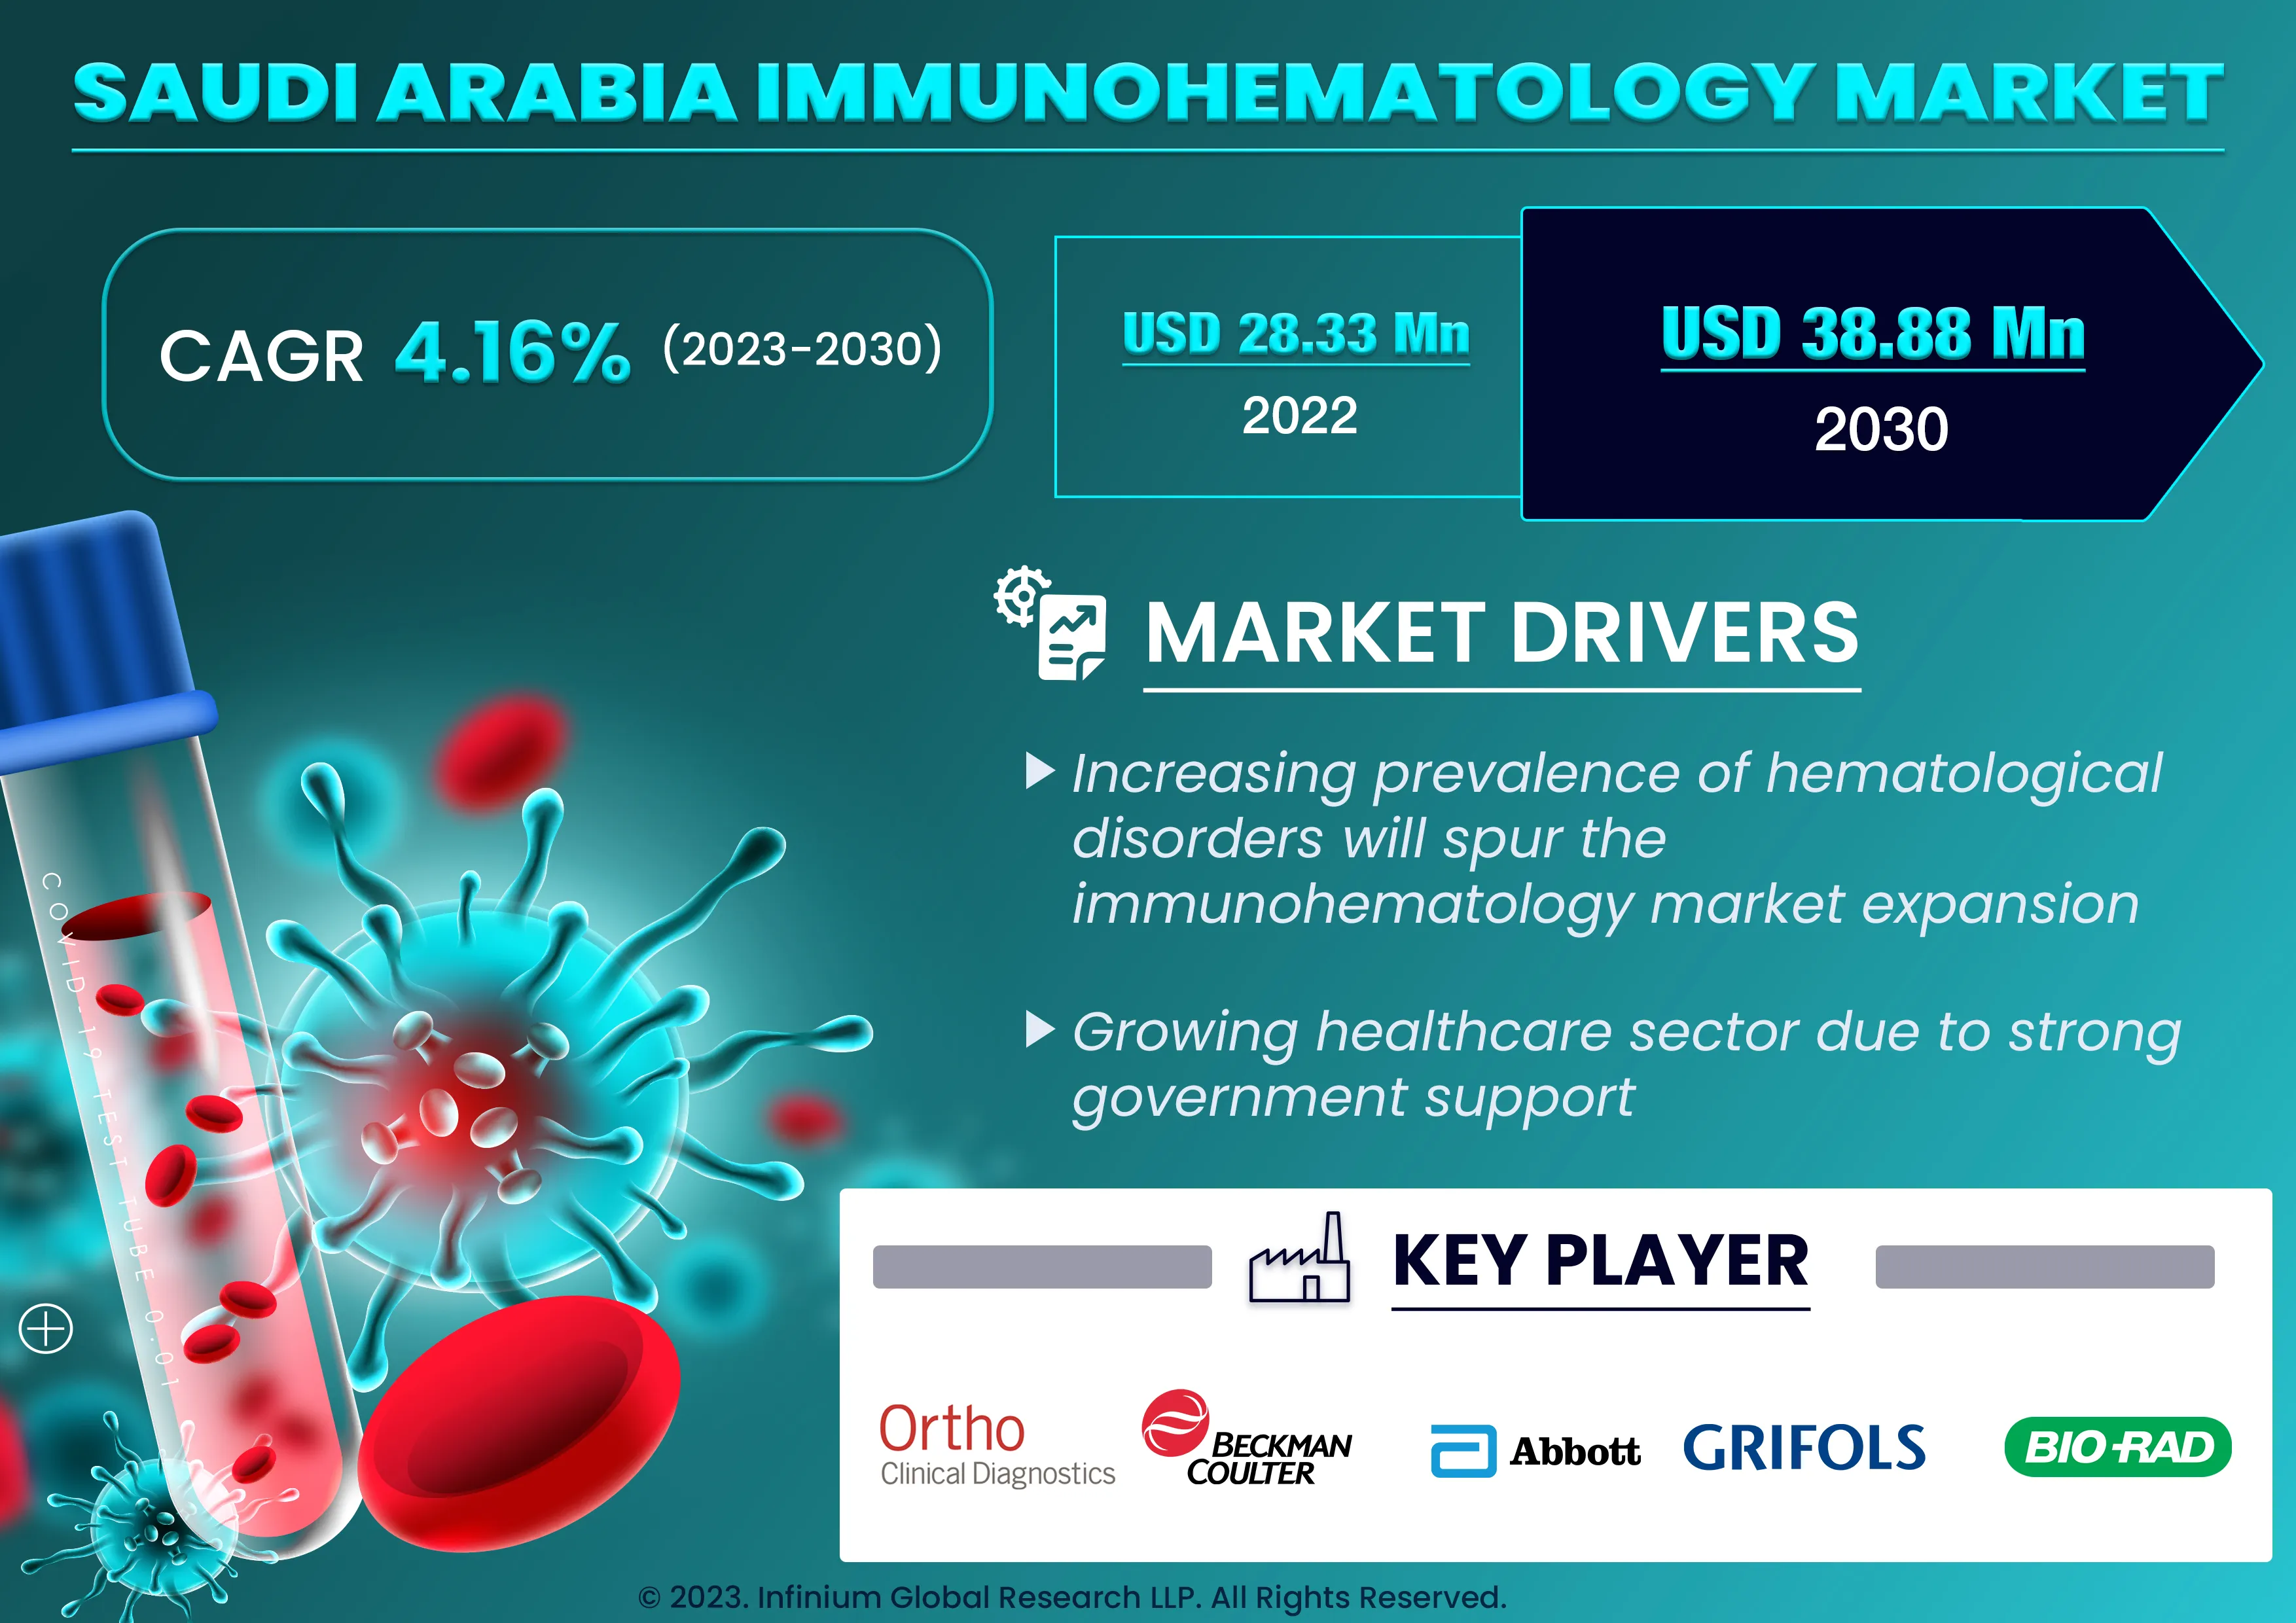 Saudi Arabia Immunohematology Market was Valued at USD 28.33 Million in 2022 and is Expected to Reach USD 38.88 Million by 2030 Growing at a CAGR of 4.16% Over the Forecast Period.